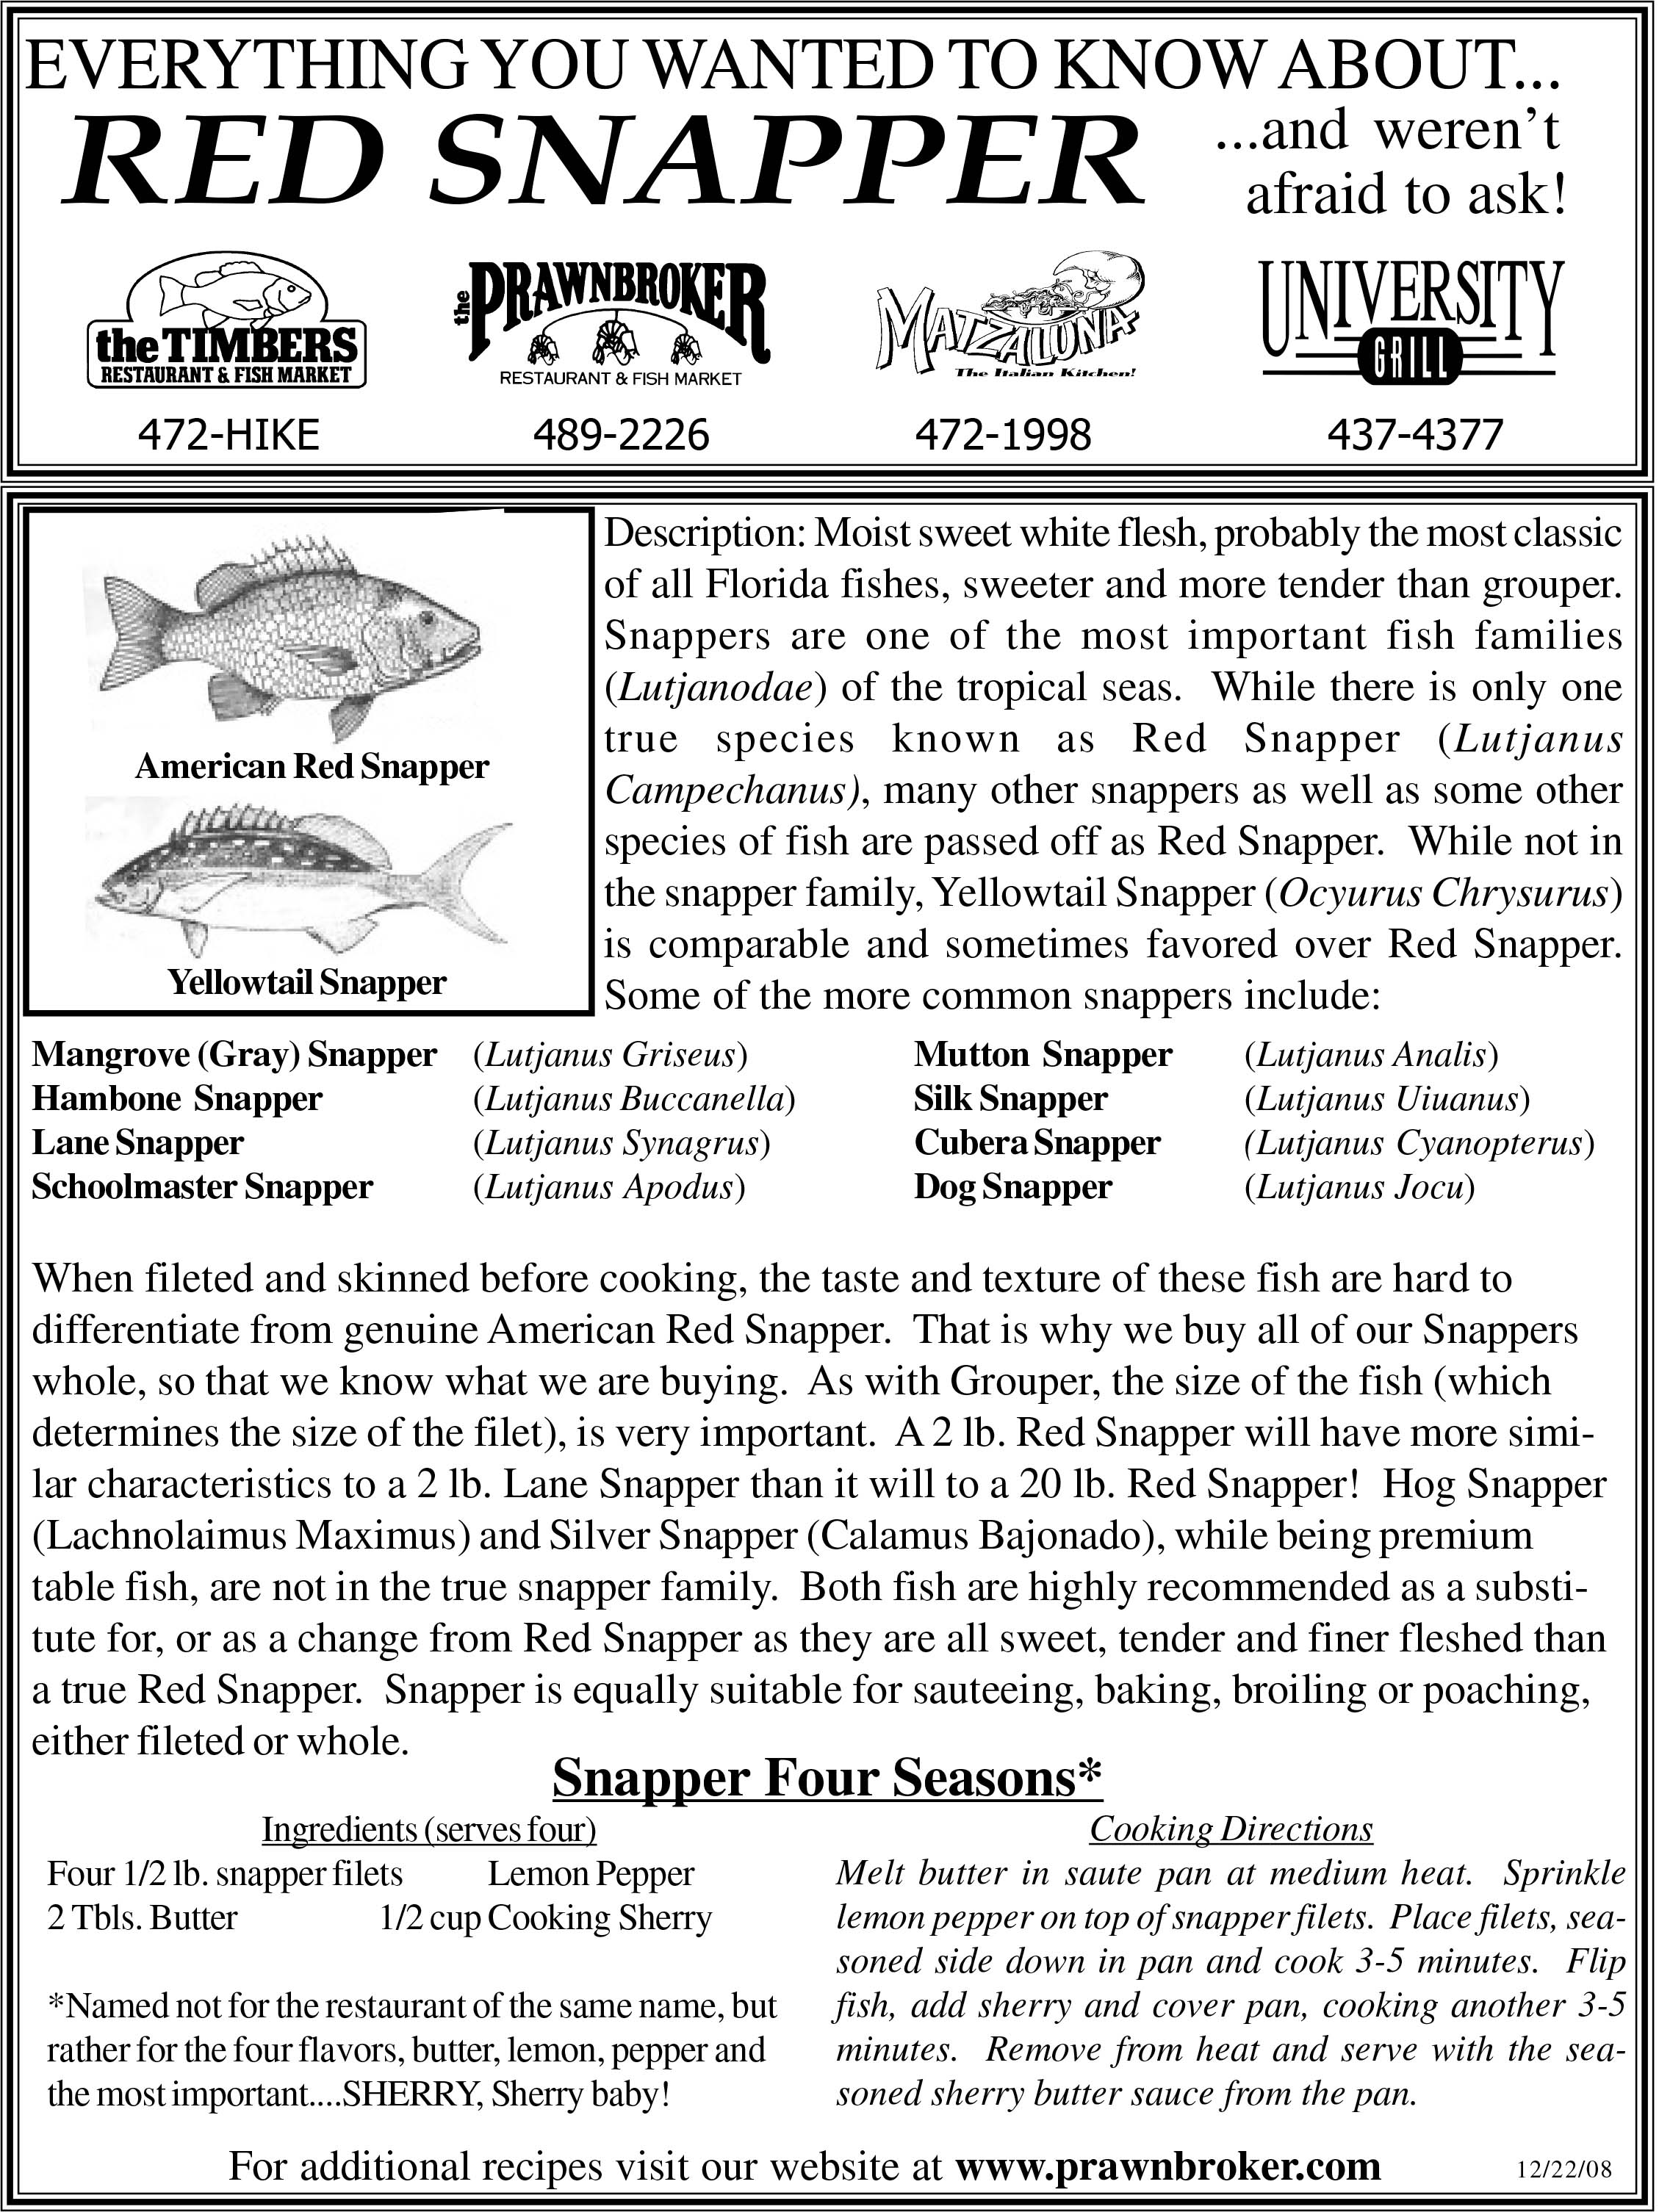 Guide to Red Snapper